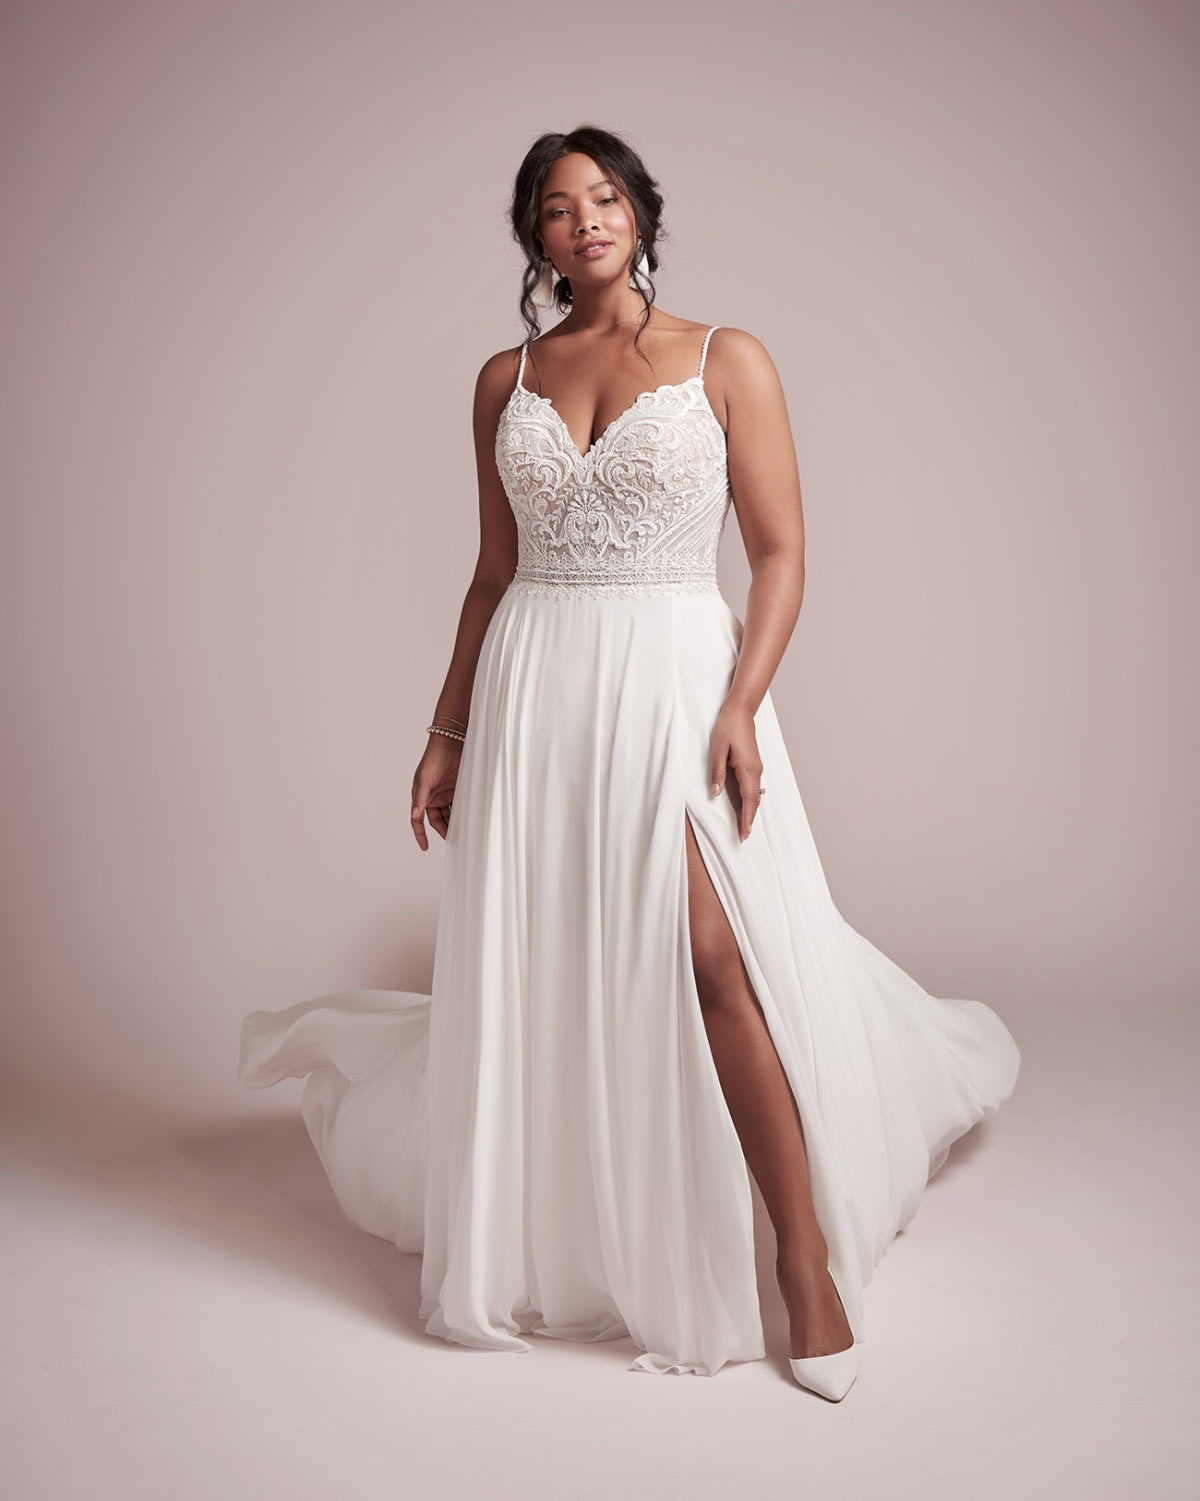 Green is the new white at Bliss Bridal Gowns